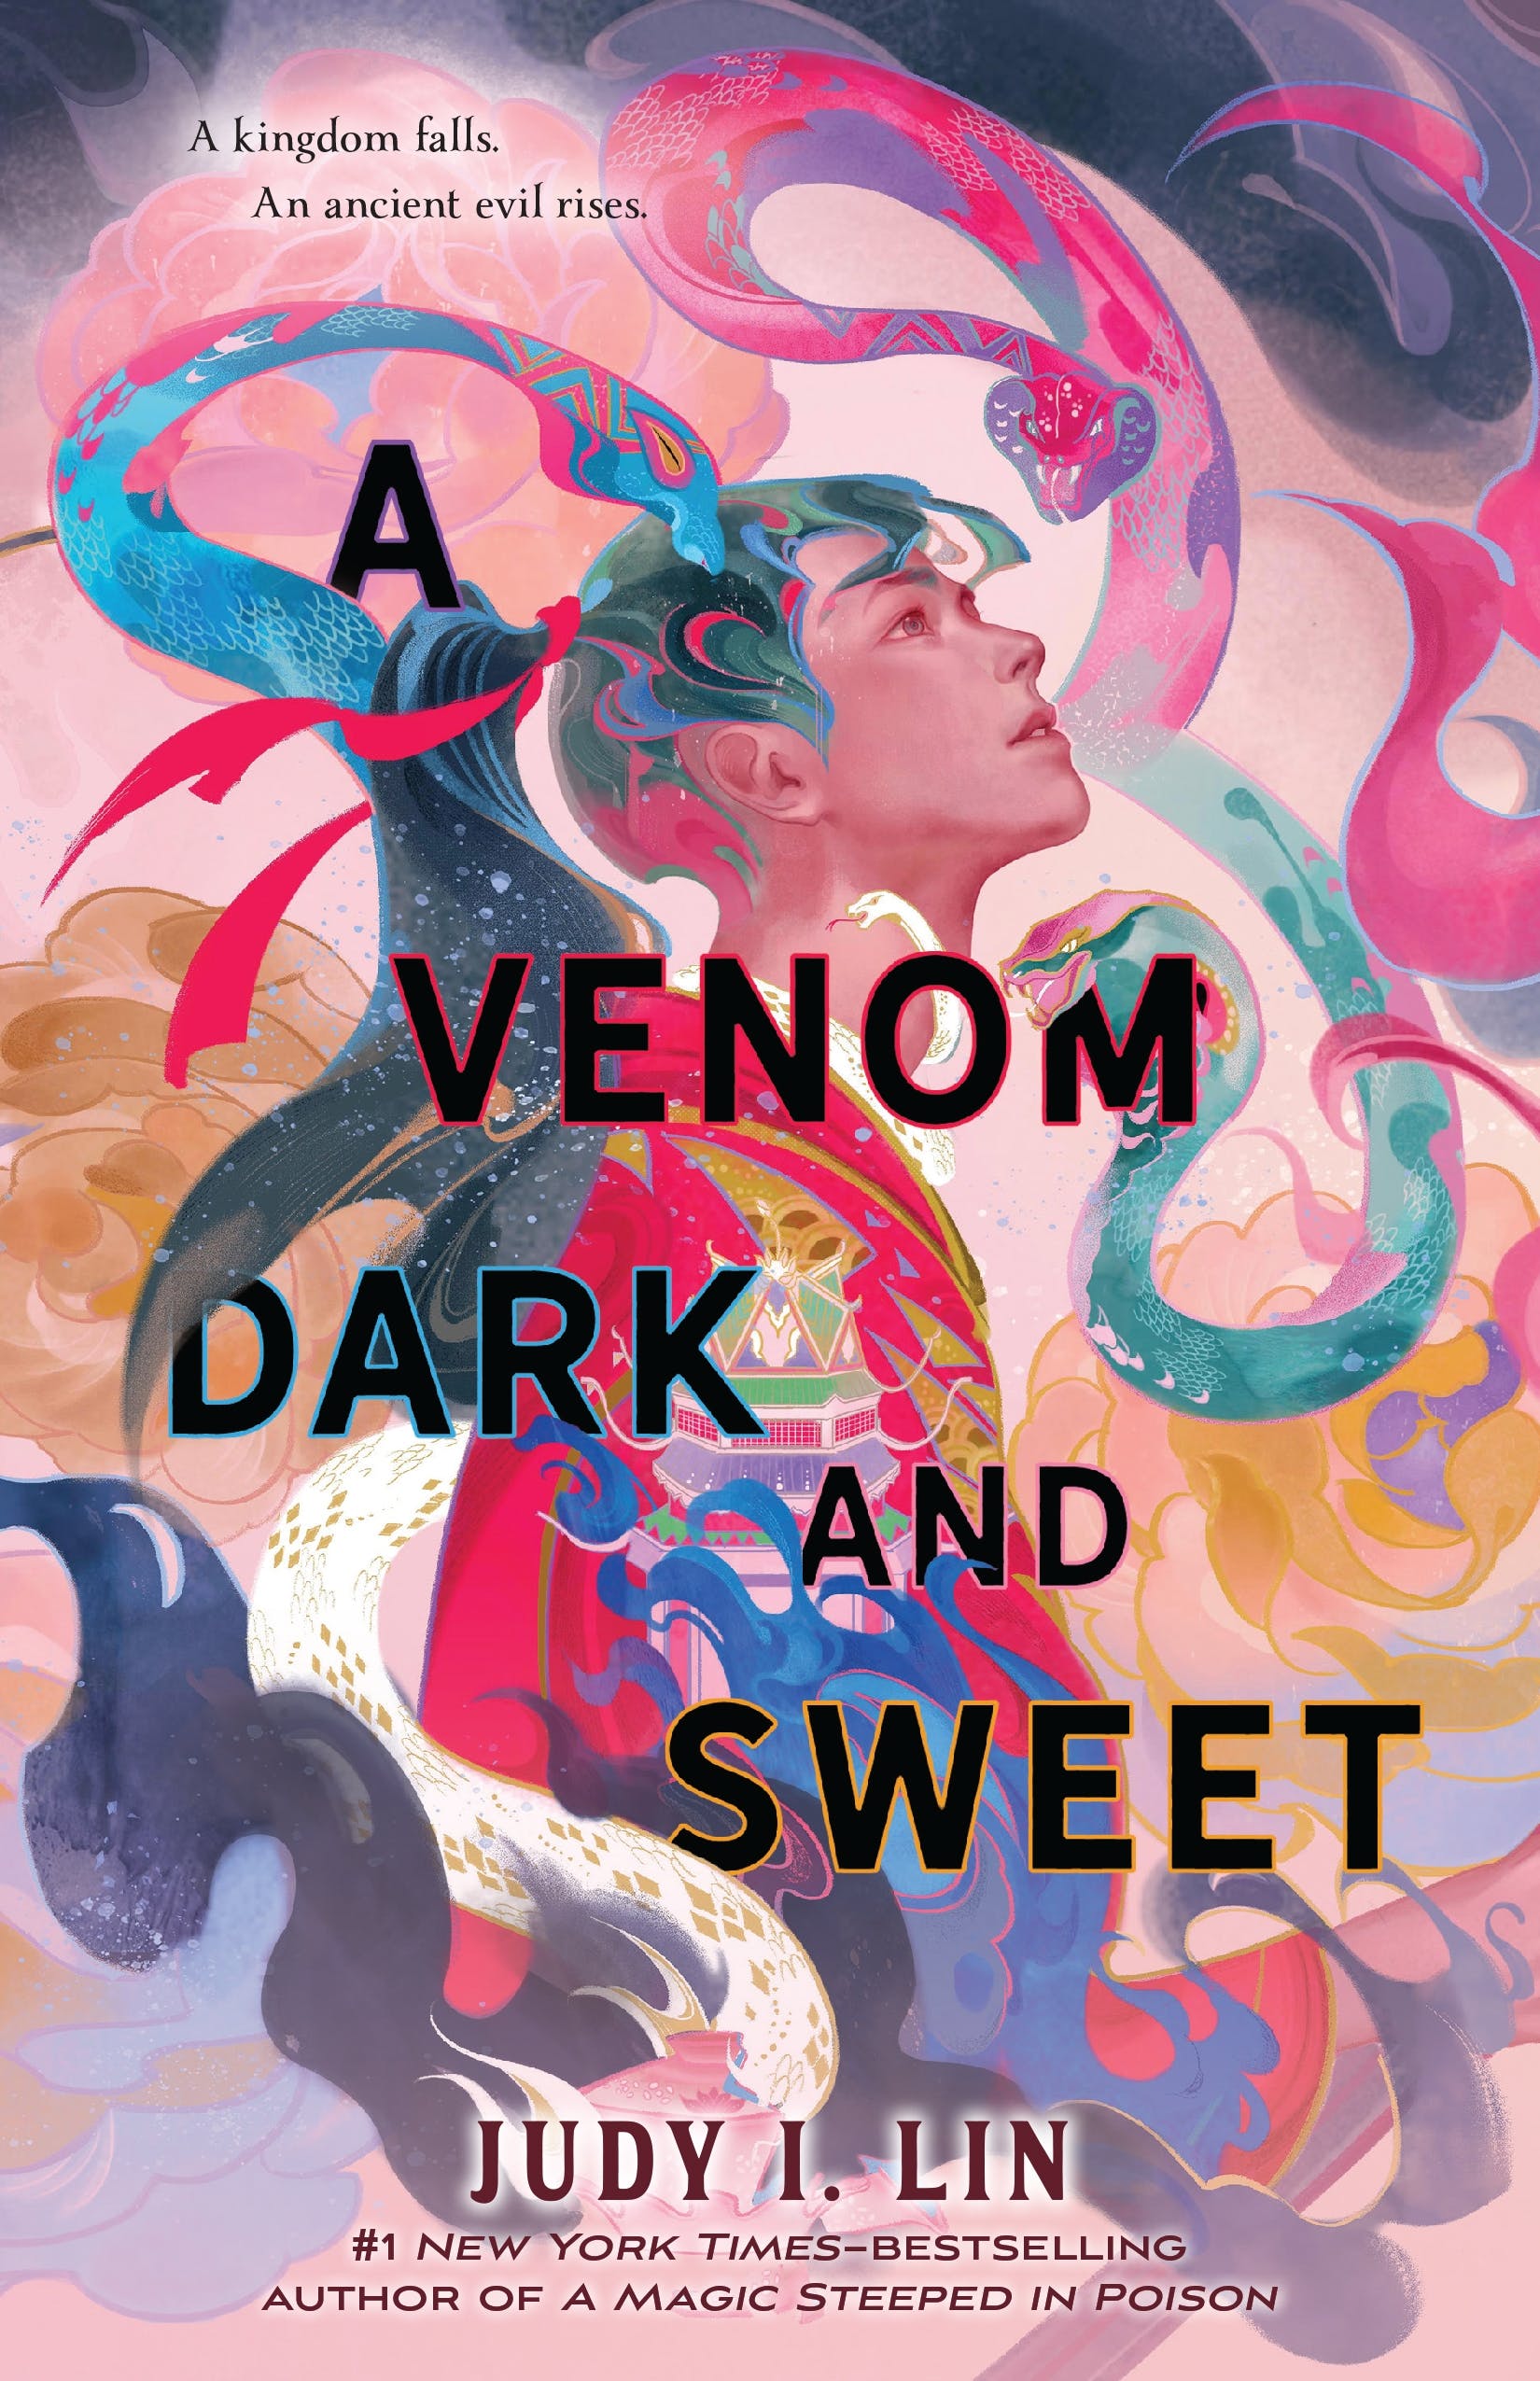 Image for "A Venom Dark and Sweet"